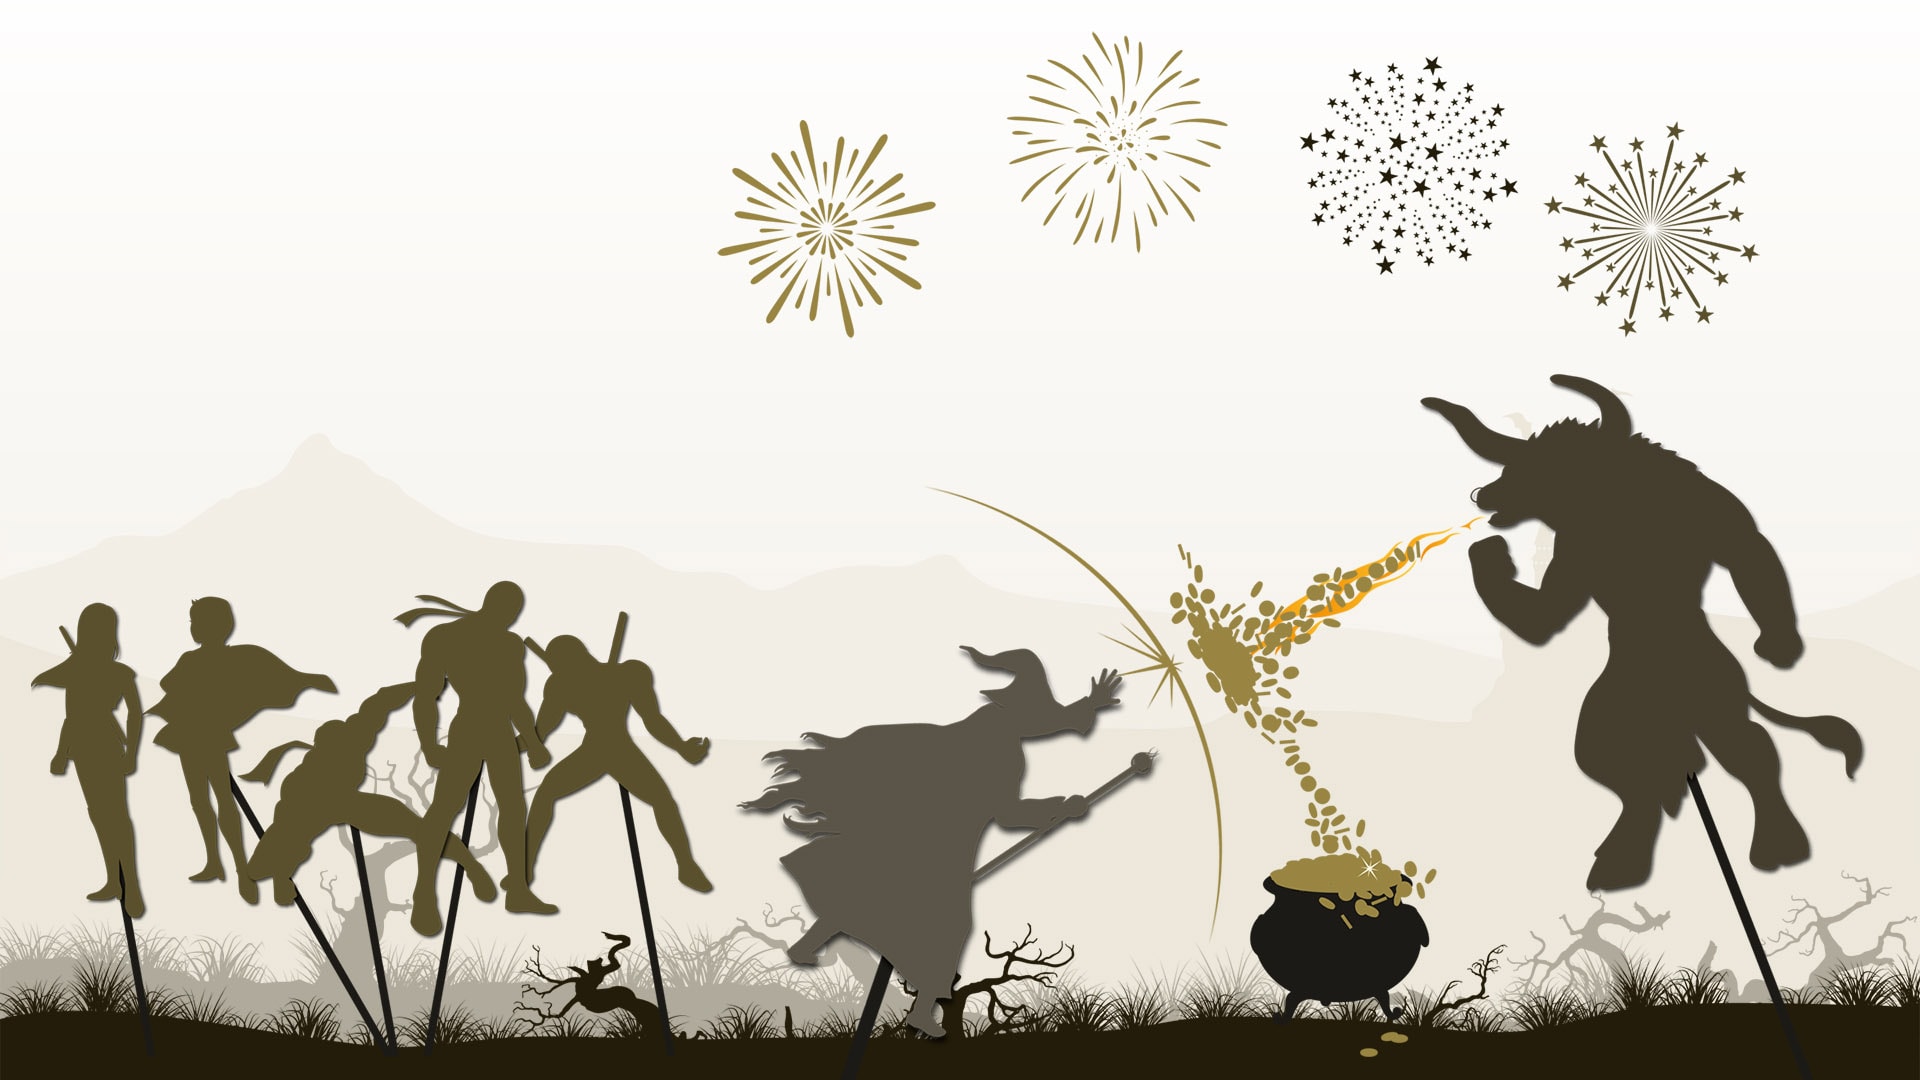 A graphic with story book character silhouettes on sticks for a NEO blog article for Think Creative.